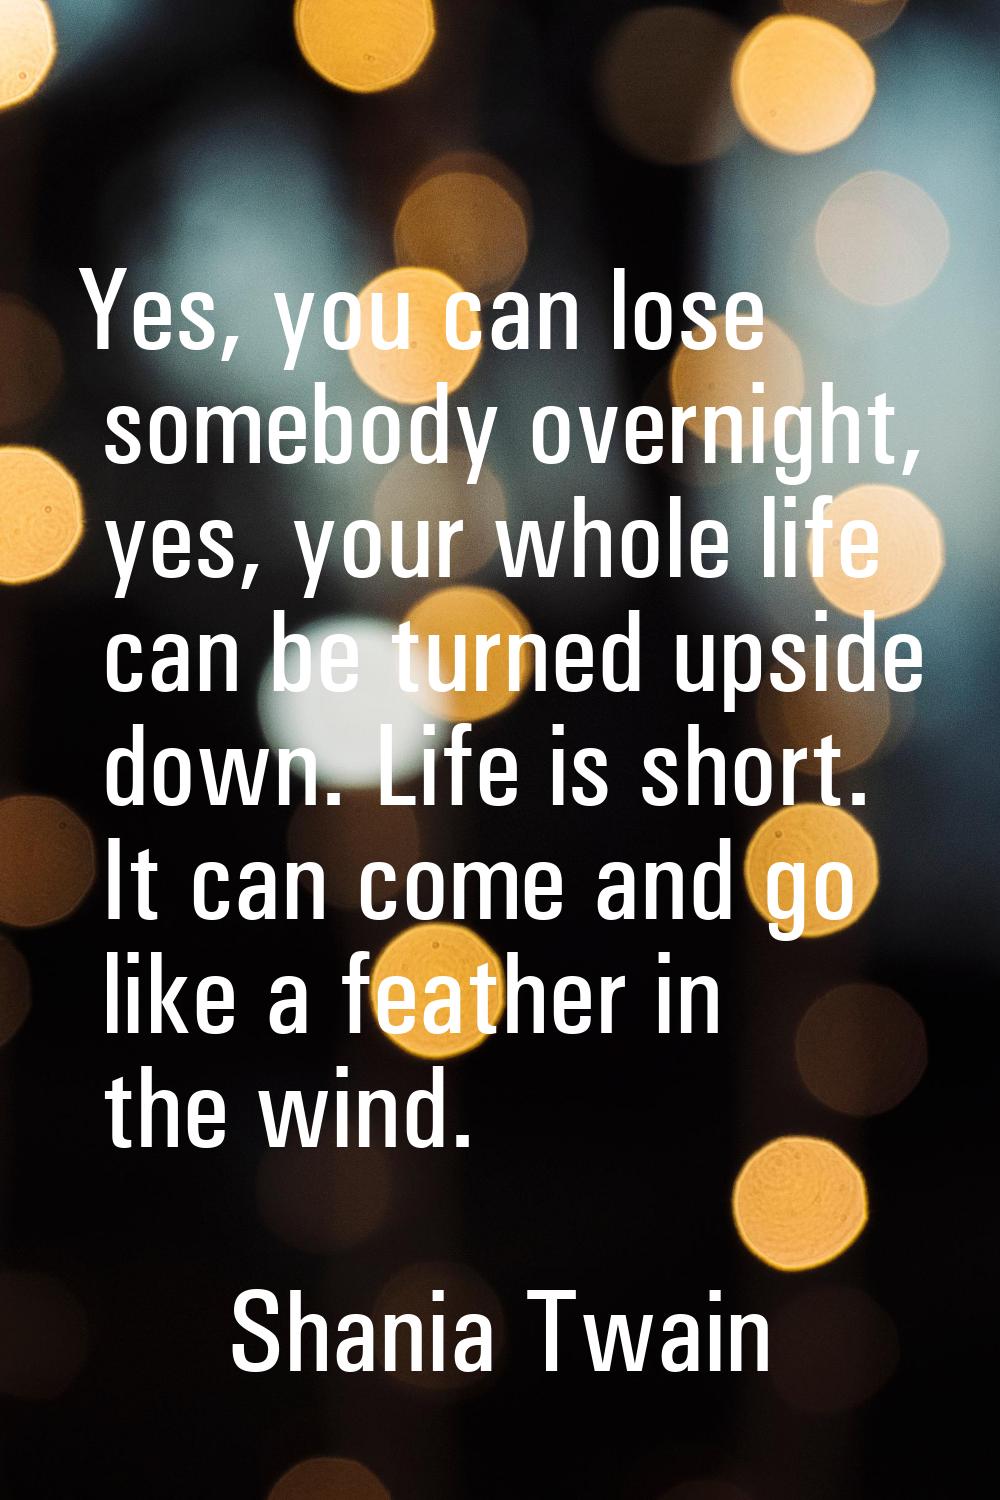 Yes, you can lose somebody overnight, yes, your whole life can be turned upside down. Life is short